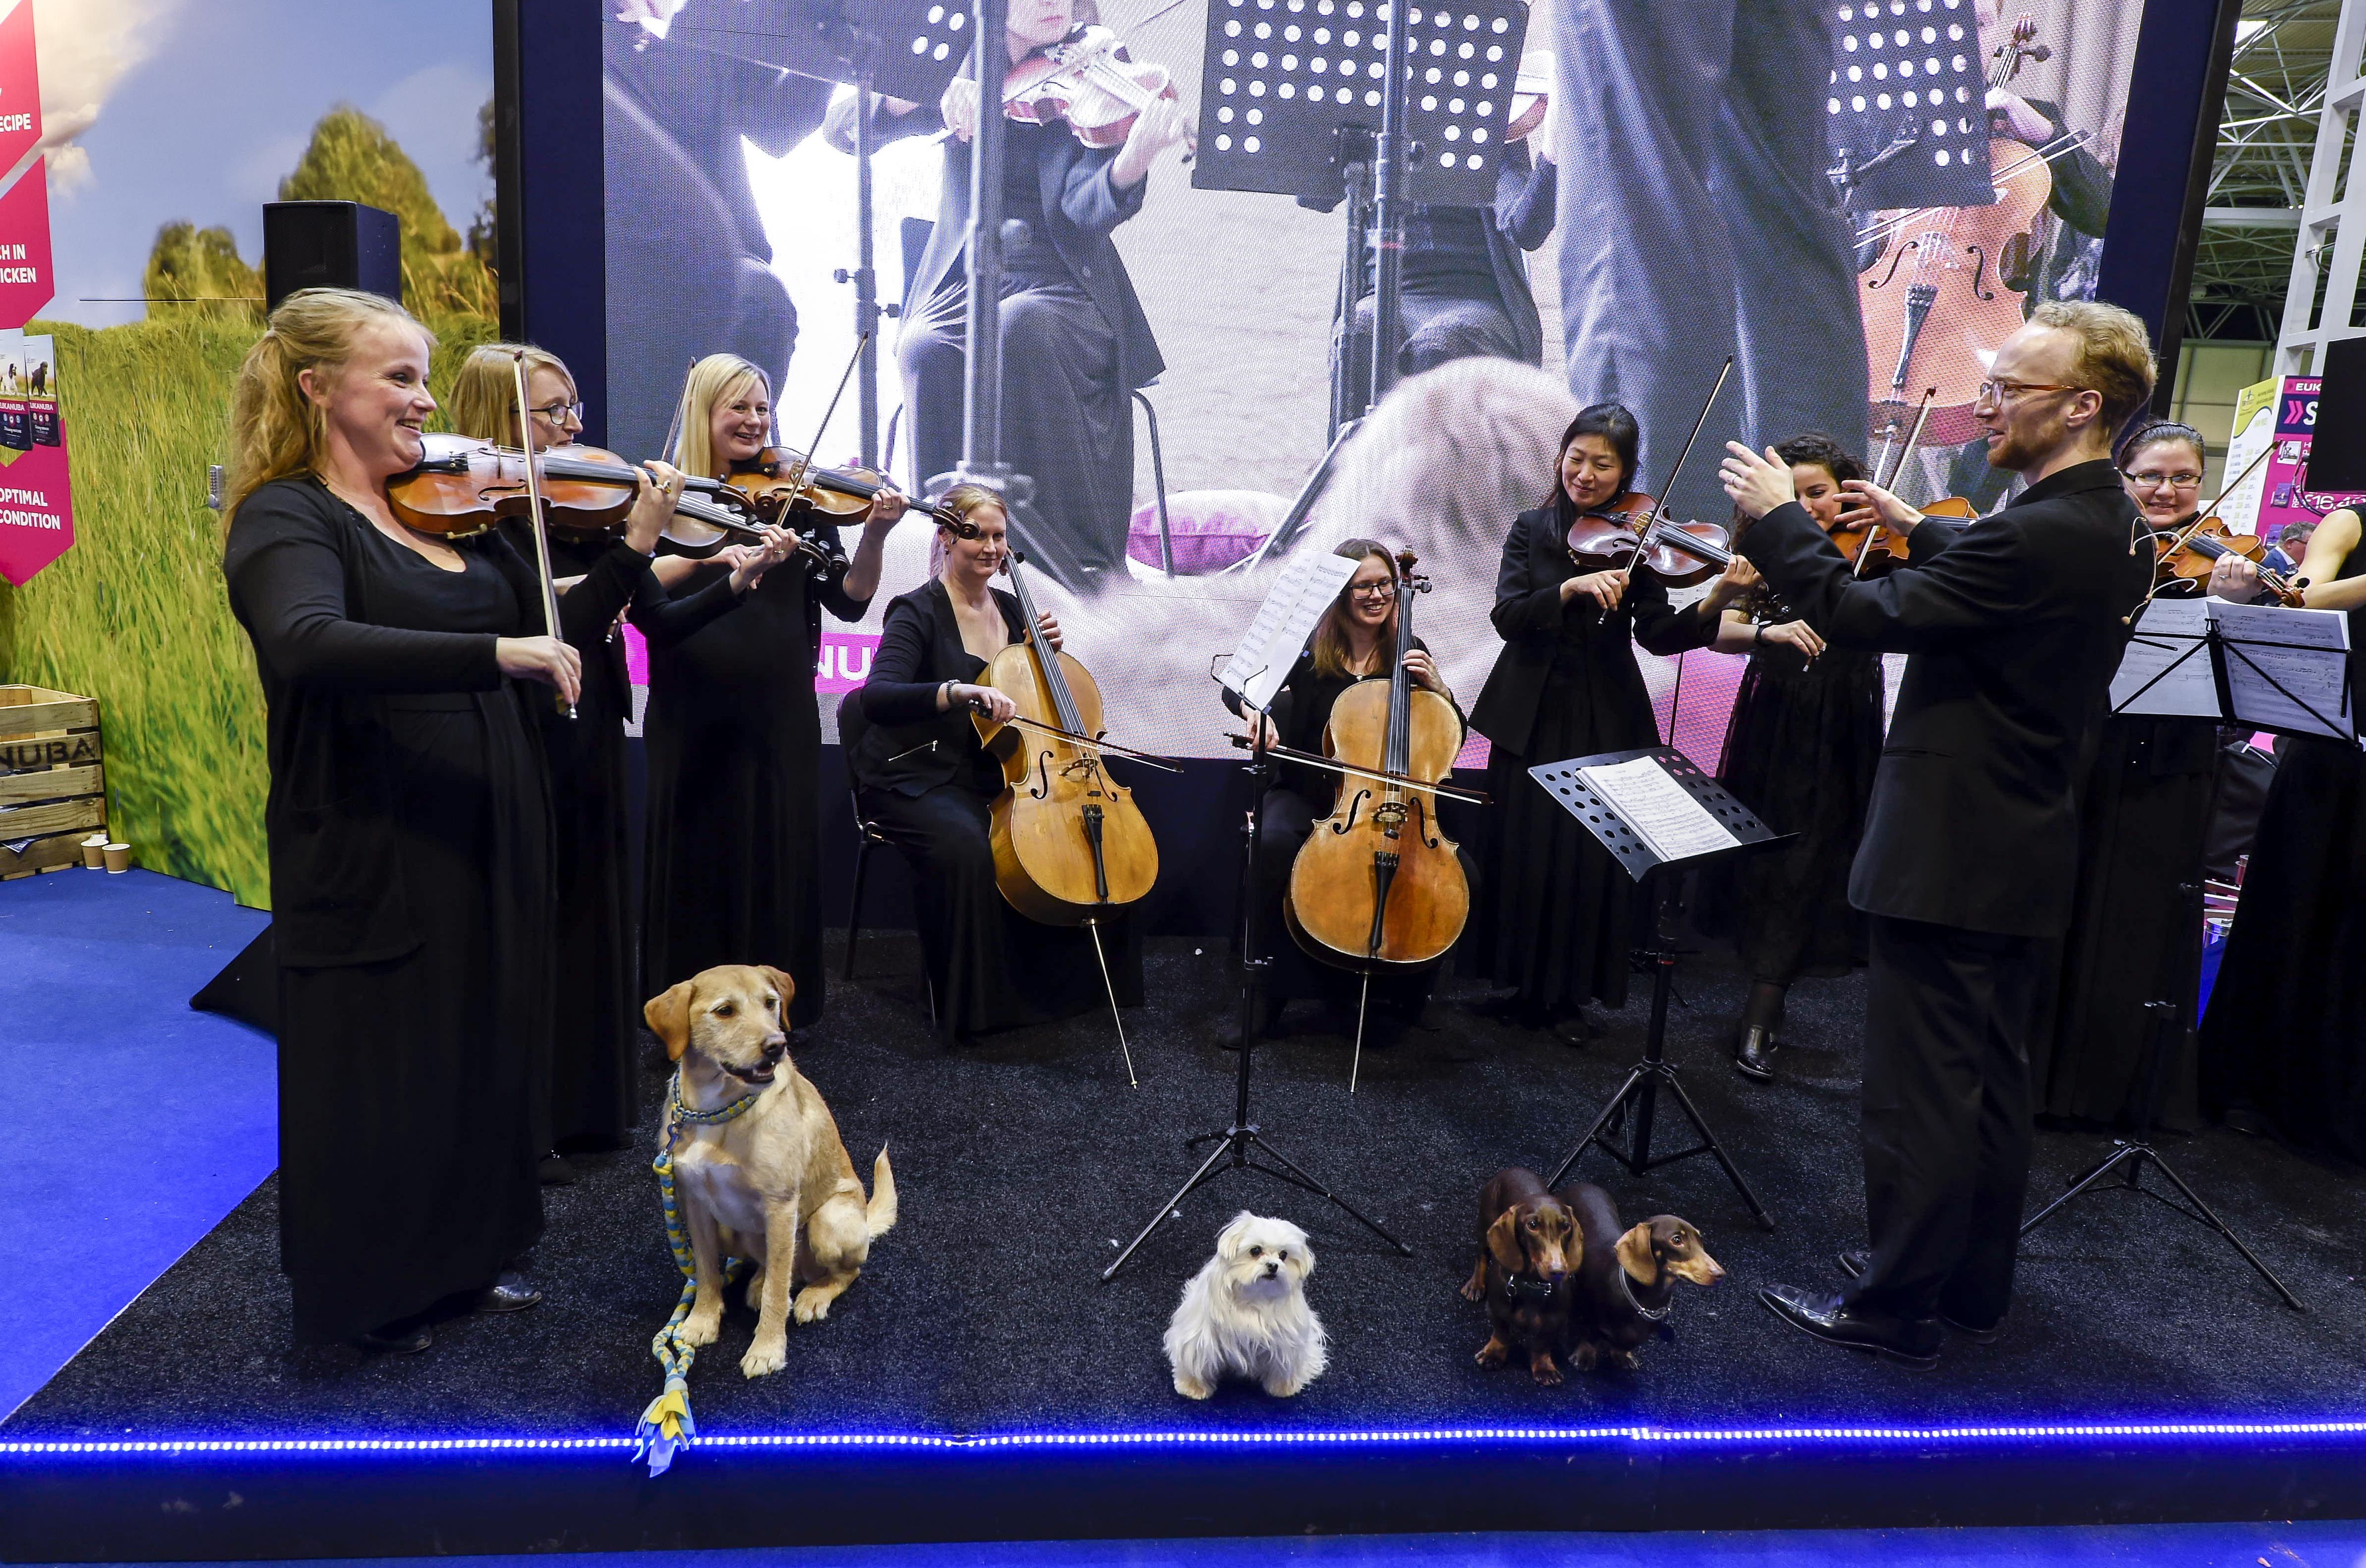 A Dog's Tale orchestra at Crufts